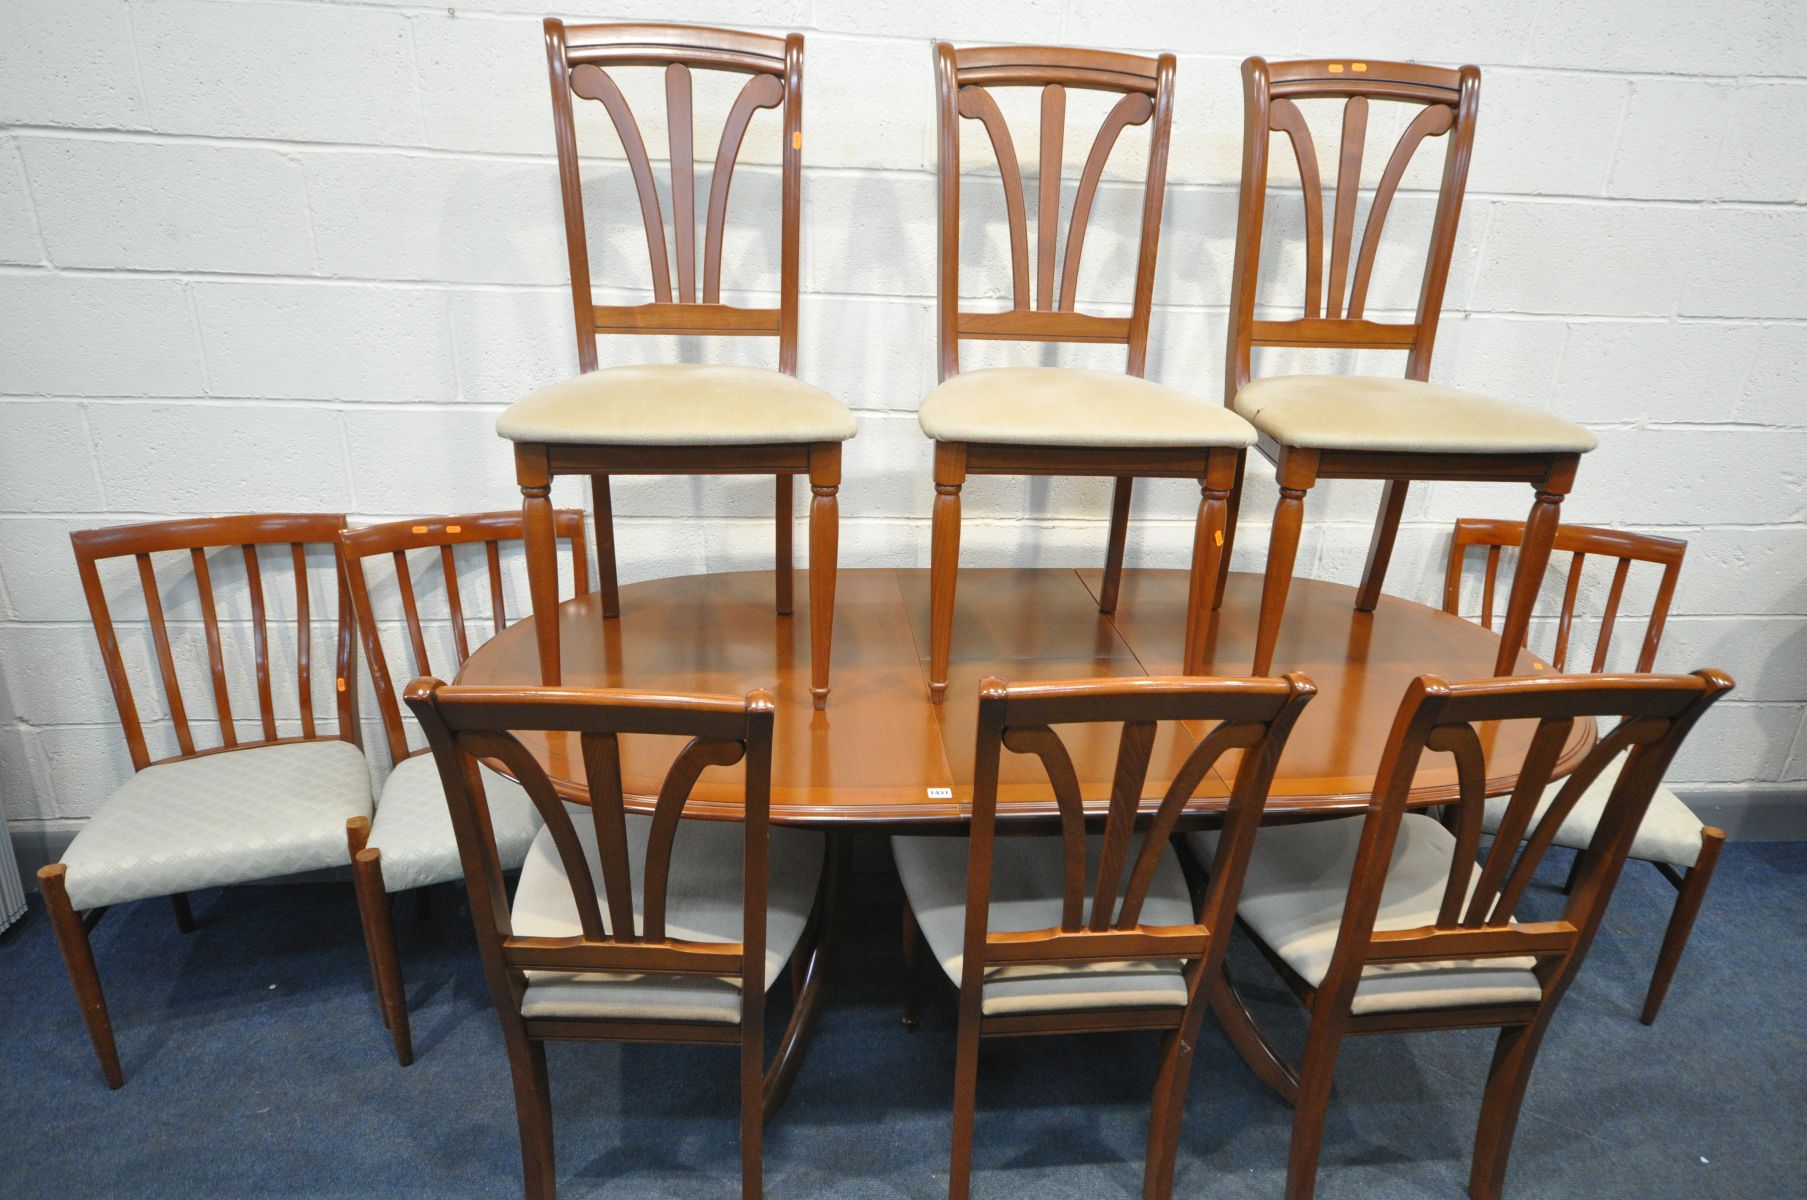 A MORRIS FURNITURE CO EXTENDING DINING TABLE, with a single additional fold out leaf, extended